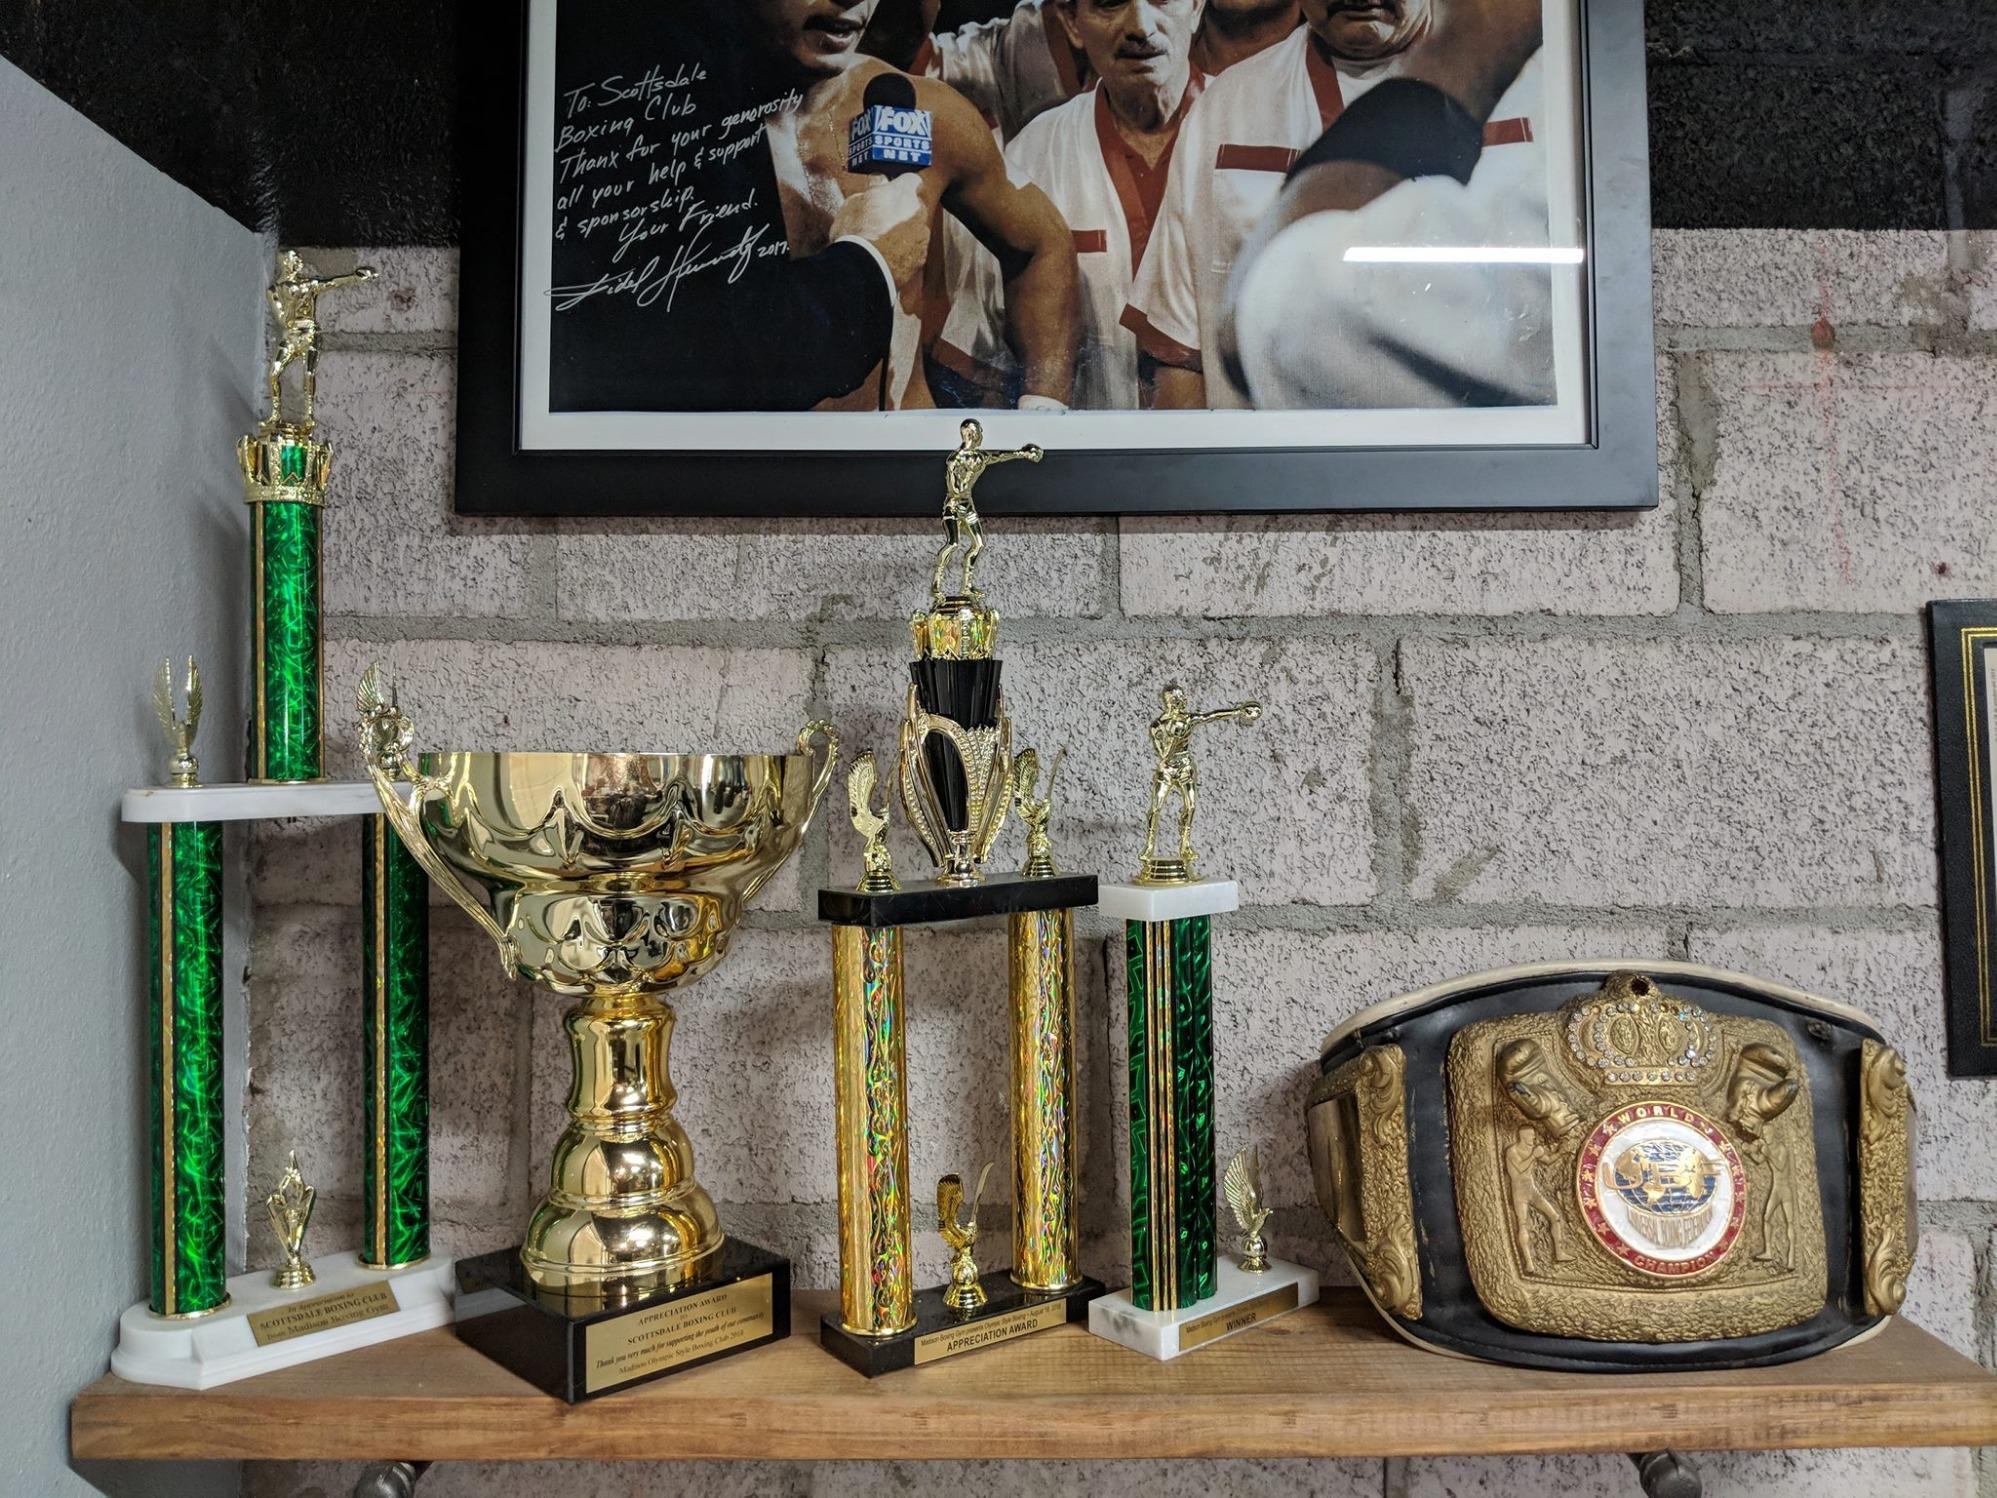 Scottsdale boxing club awards from boxing professions. Scottsdale Boxing Club Scottsdale (480)483-2898